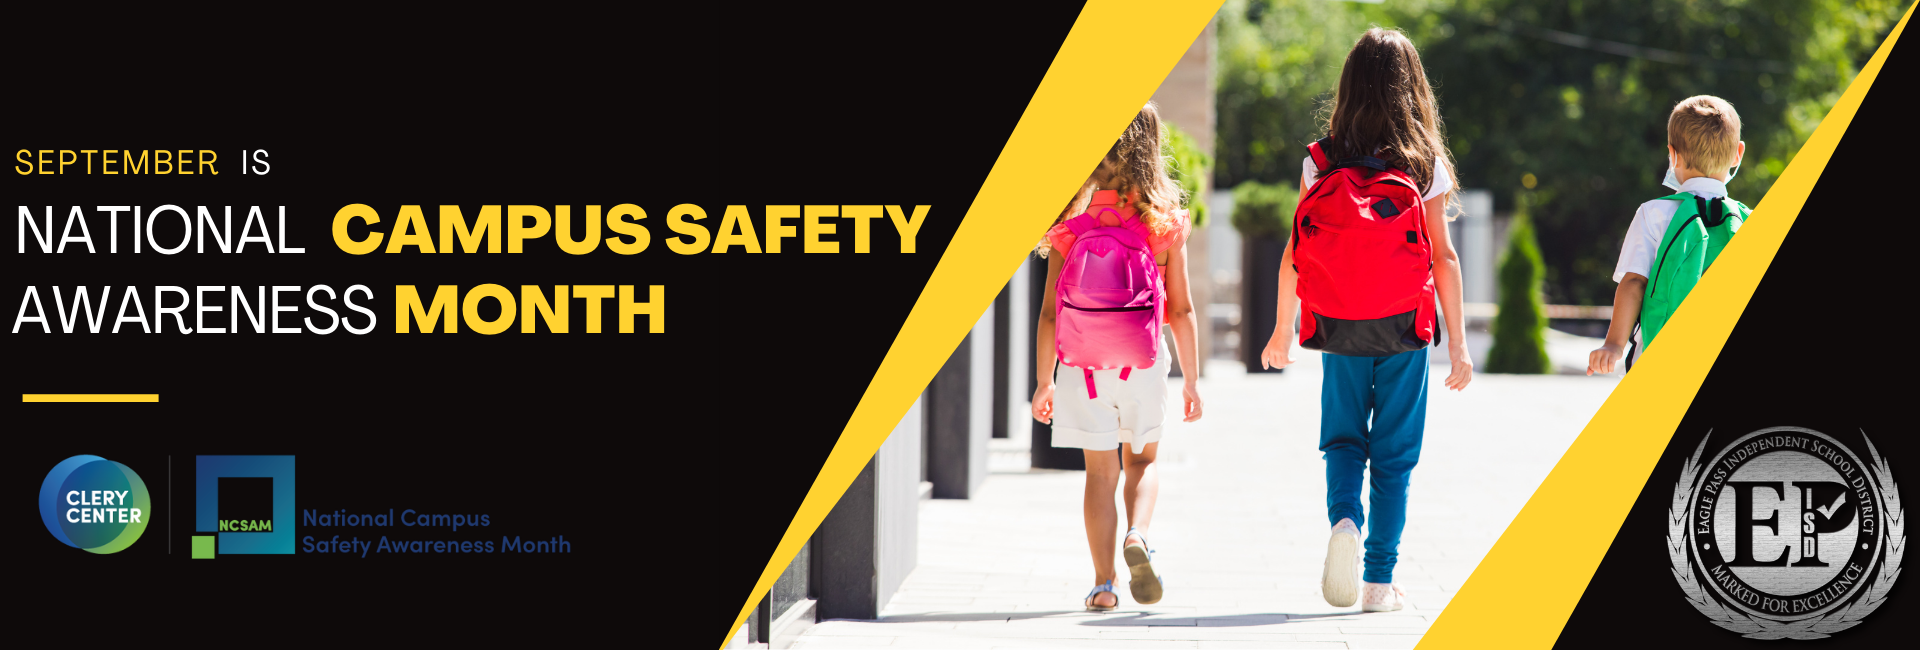 National Campus Safety Awareness Month banner